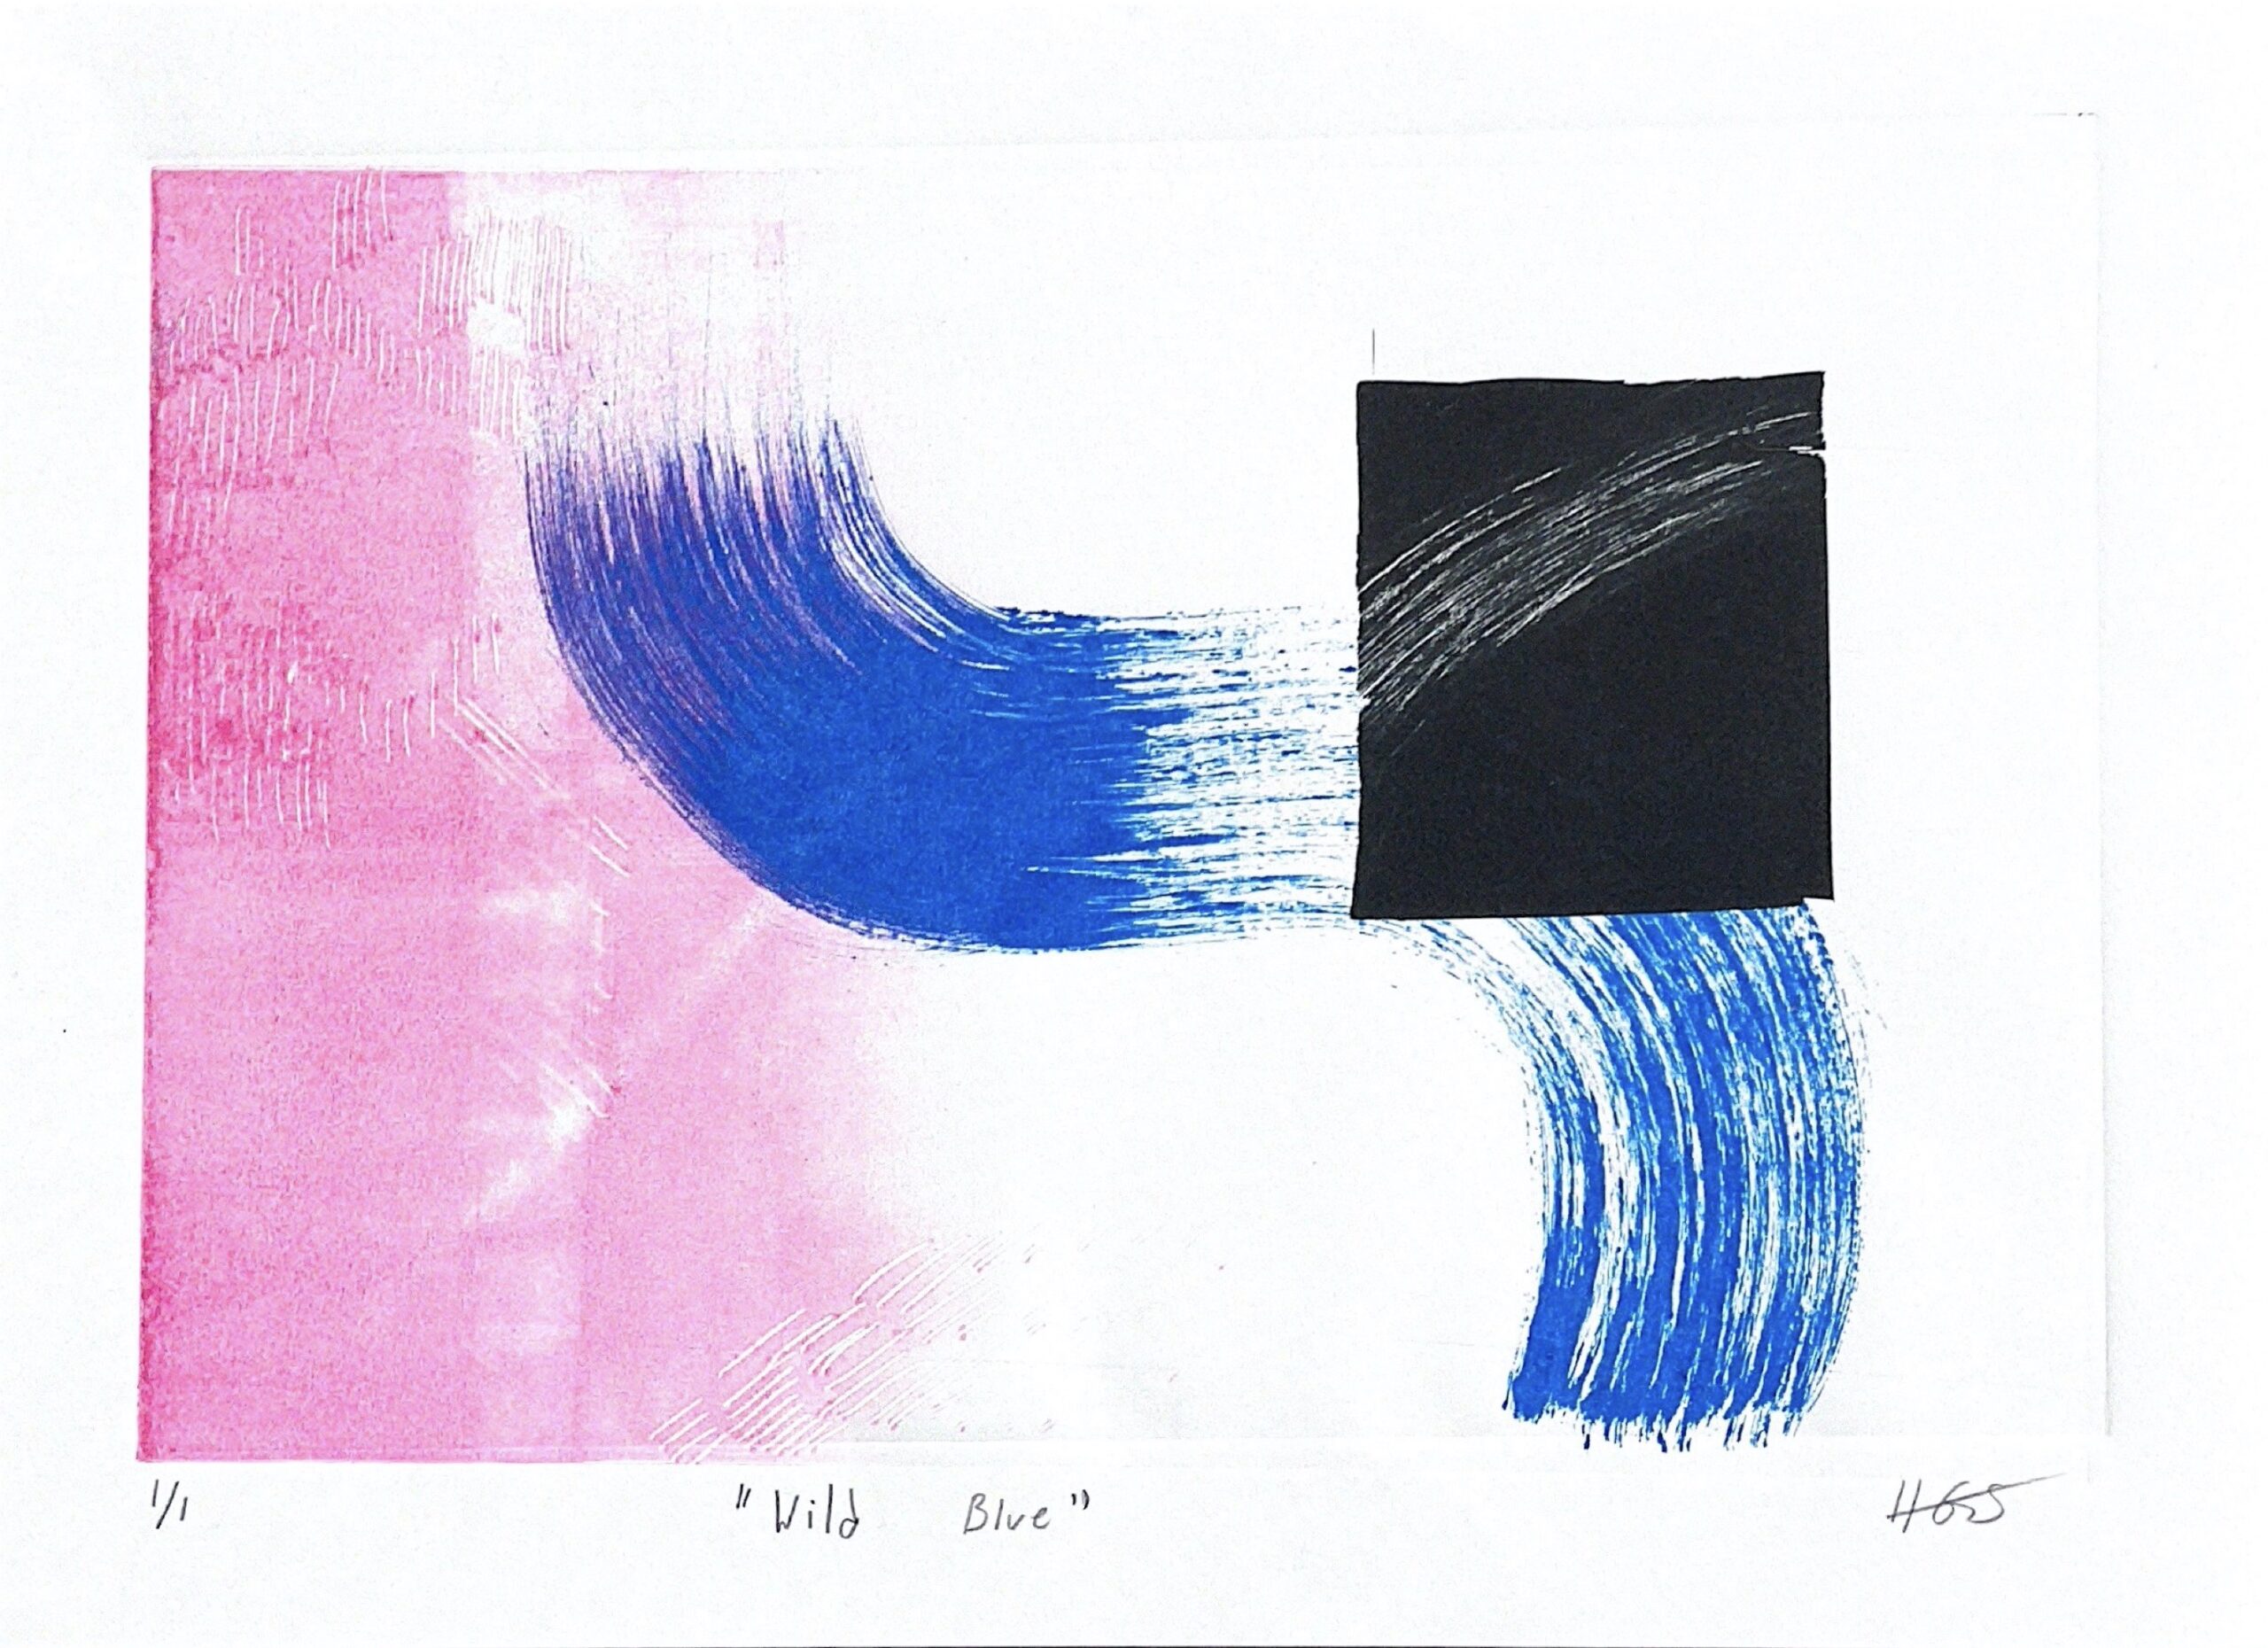 A print with pink, a blue streak, and a black box.